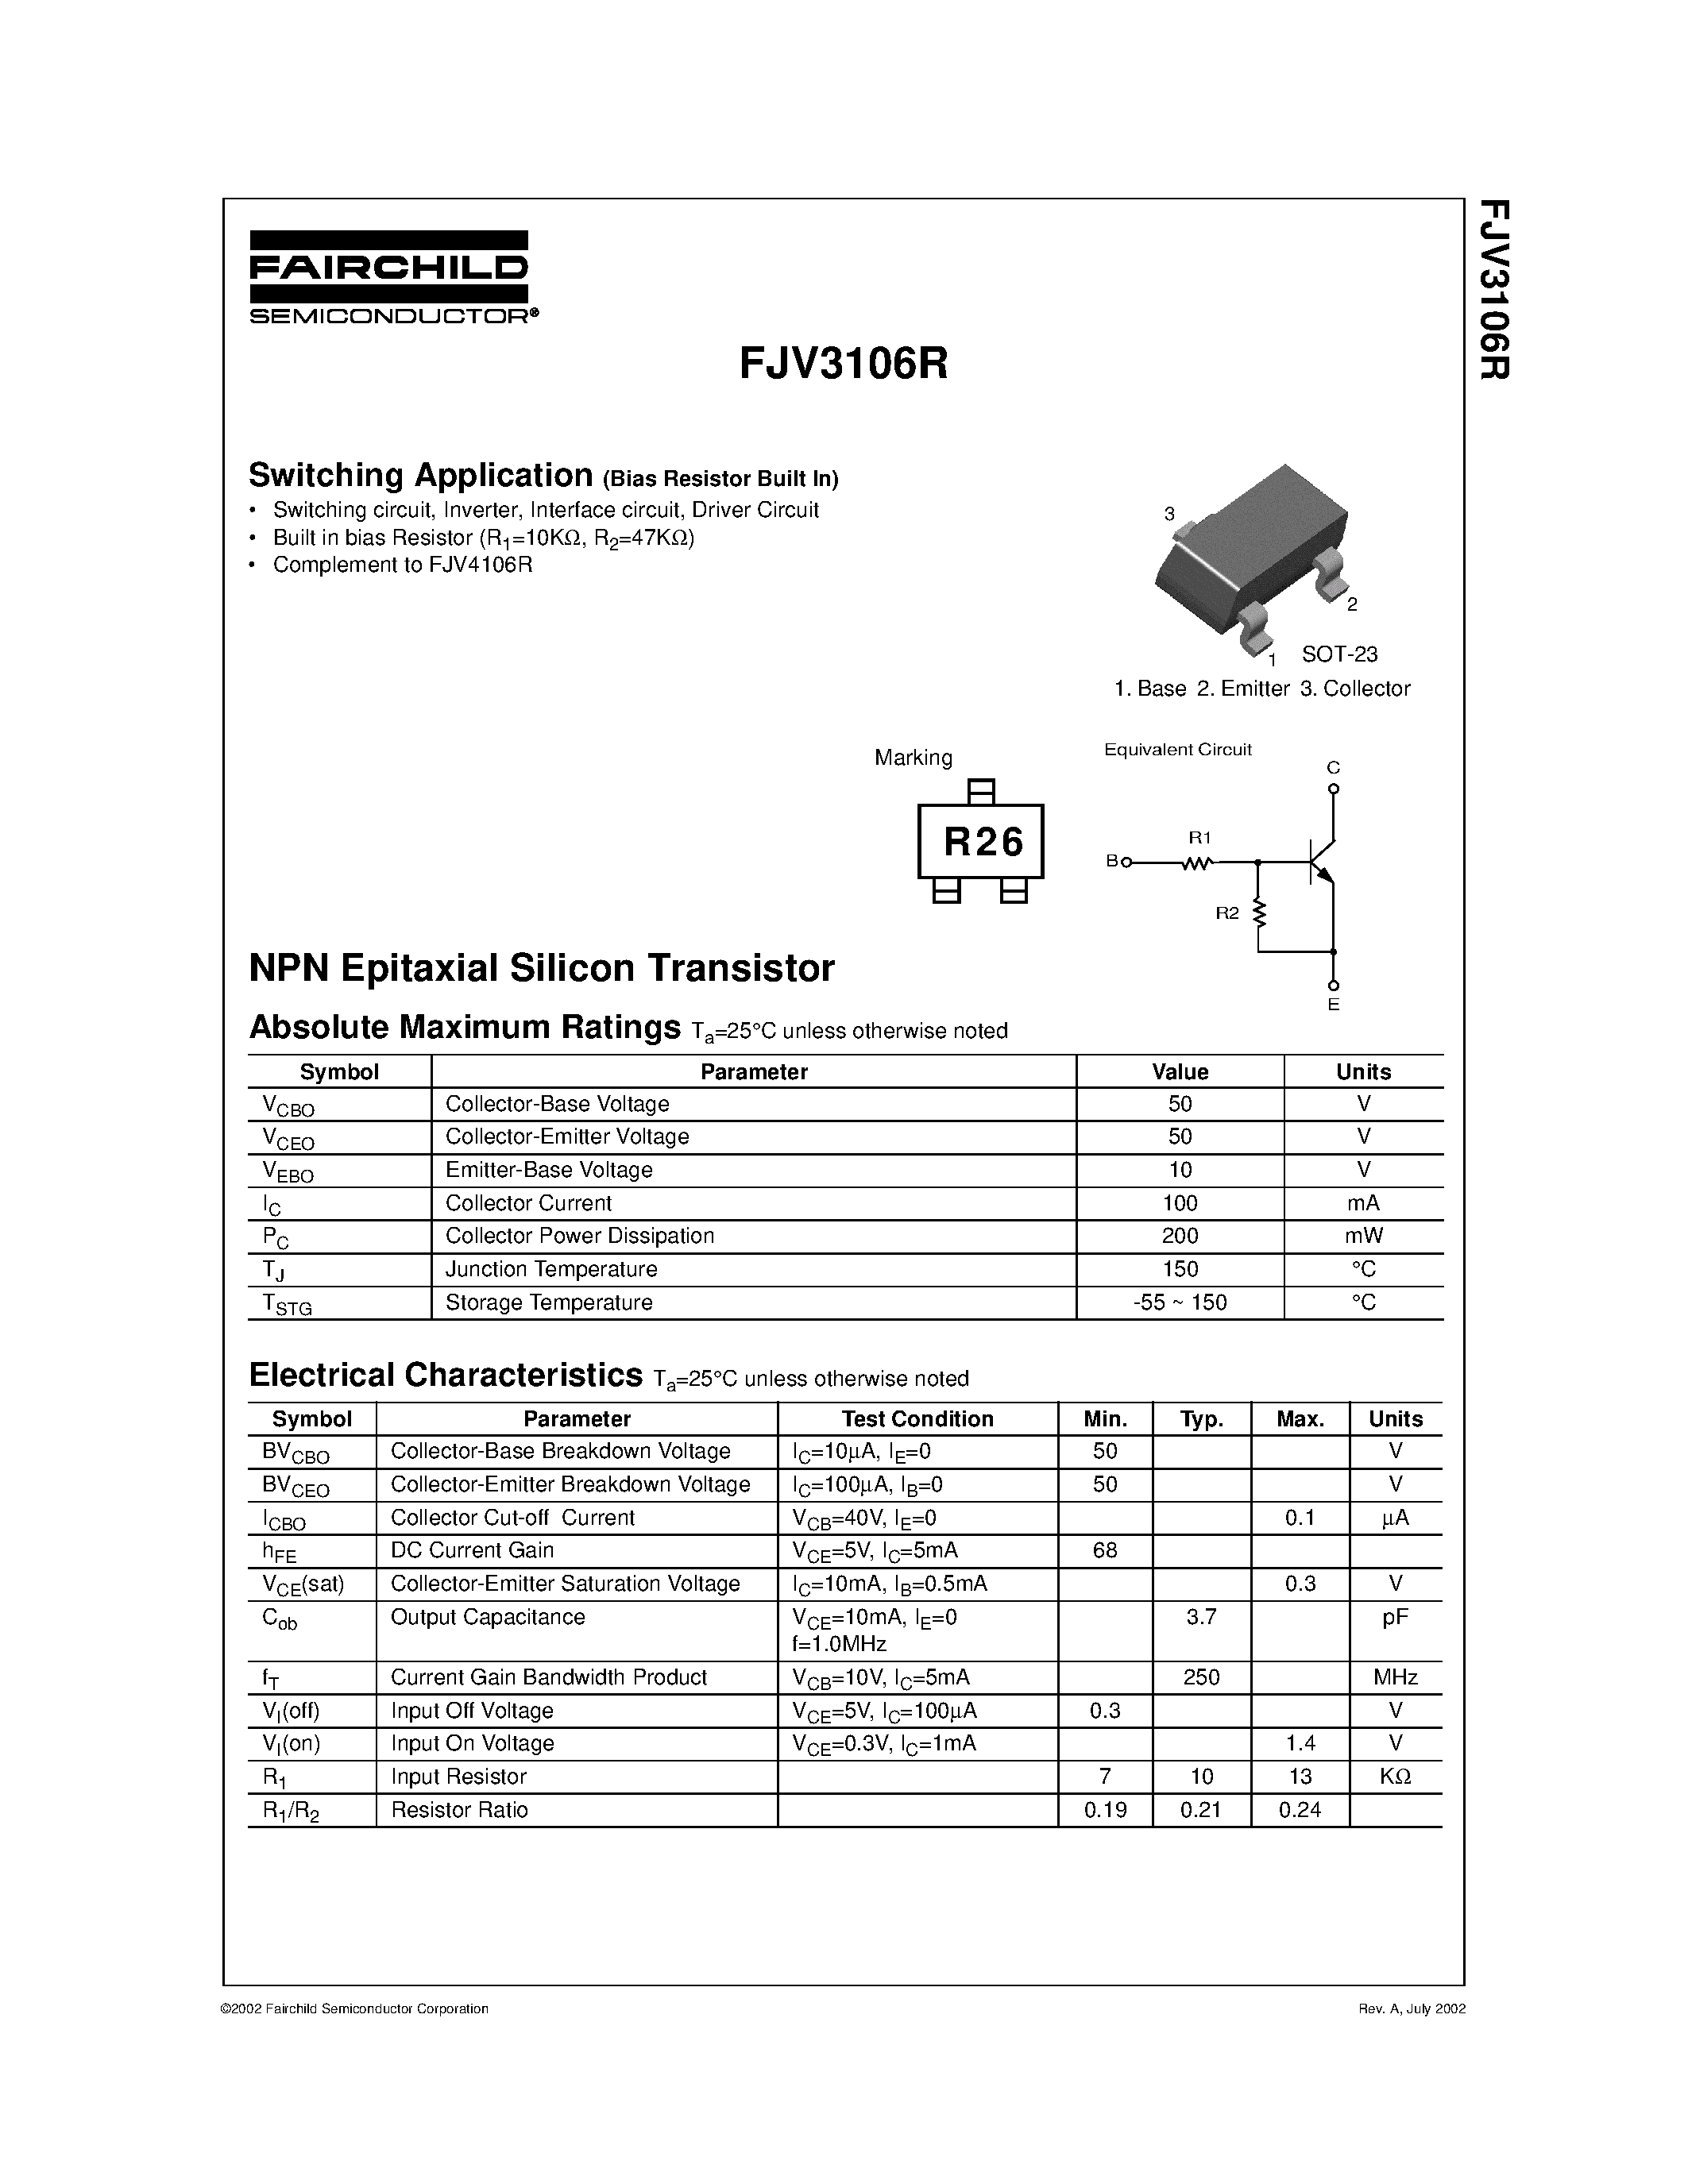 Datasheet FJV3106R - NPN Epitaxial Silicon Transistor page 1